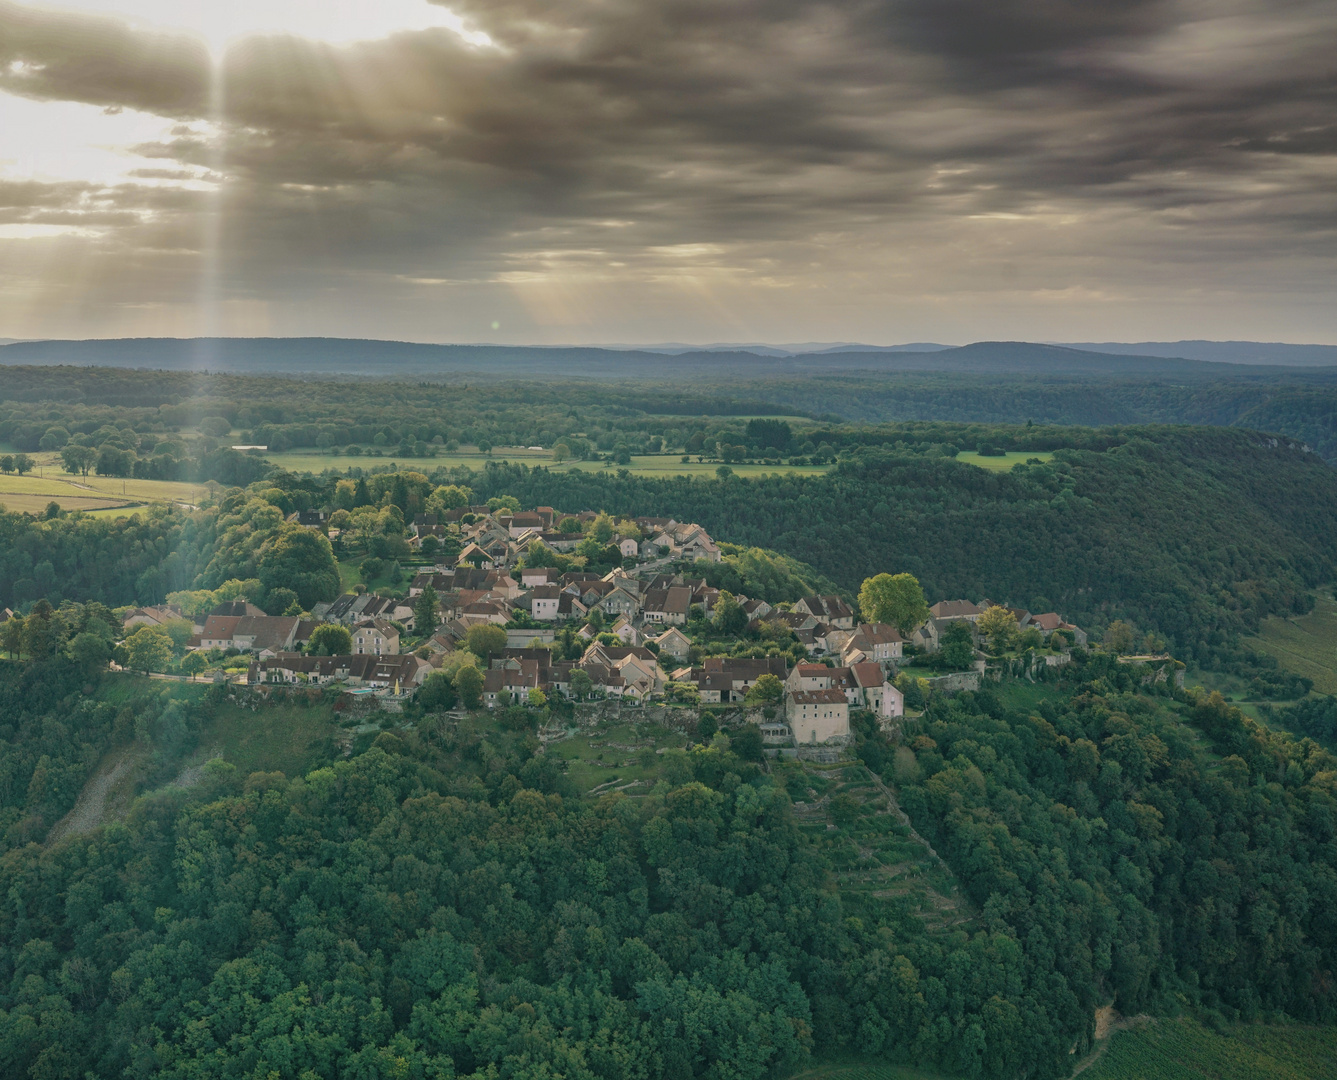 Sunray over the village